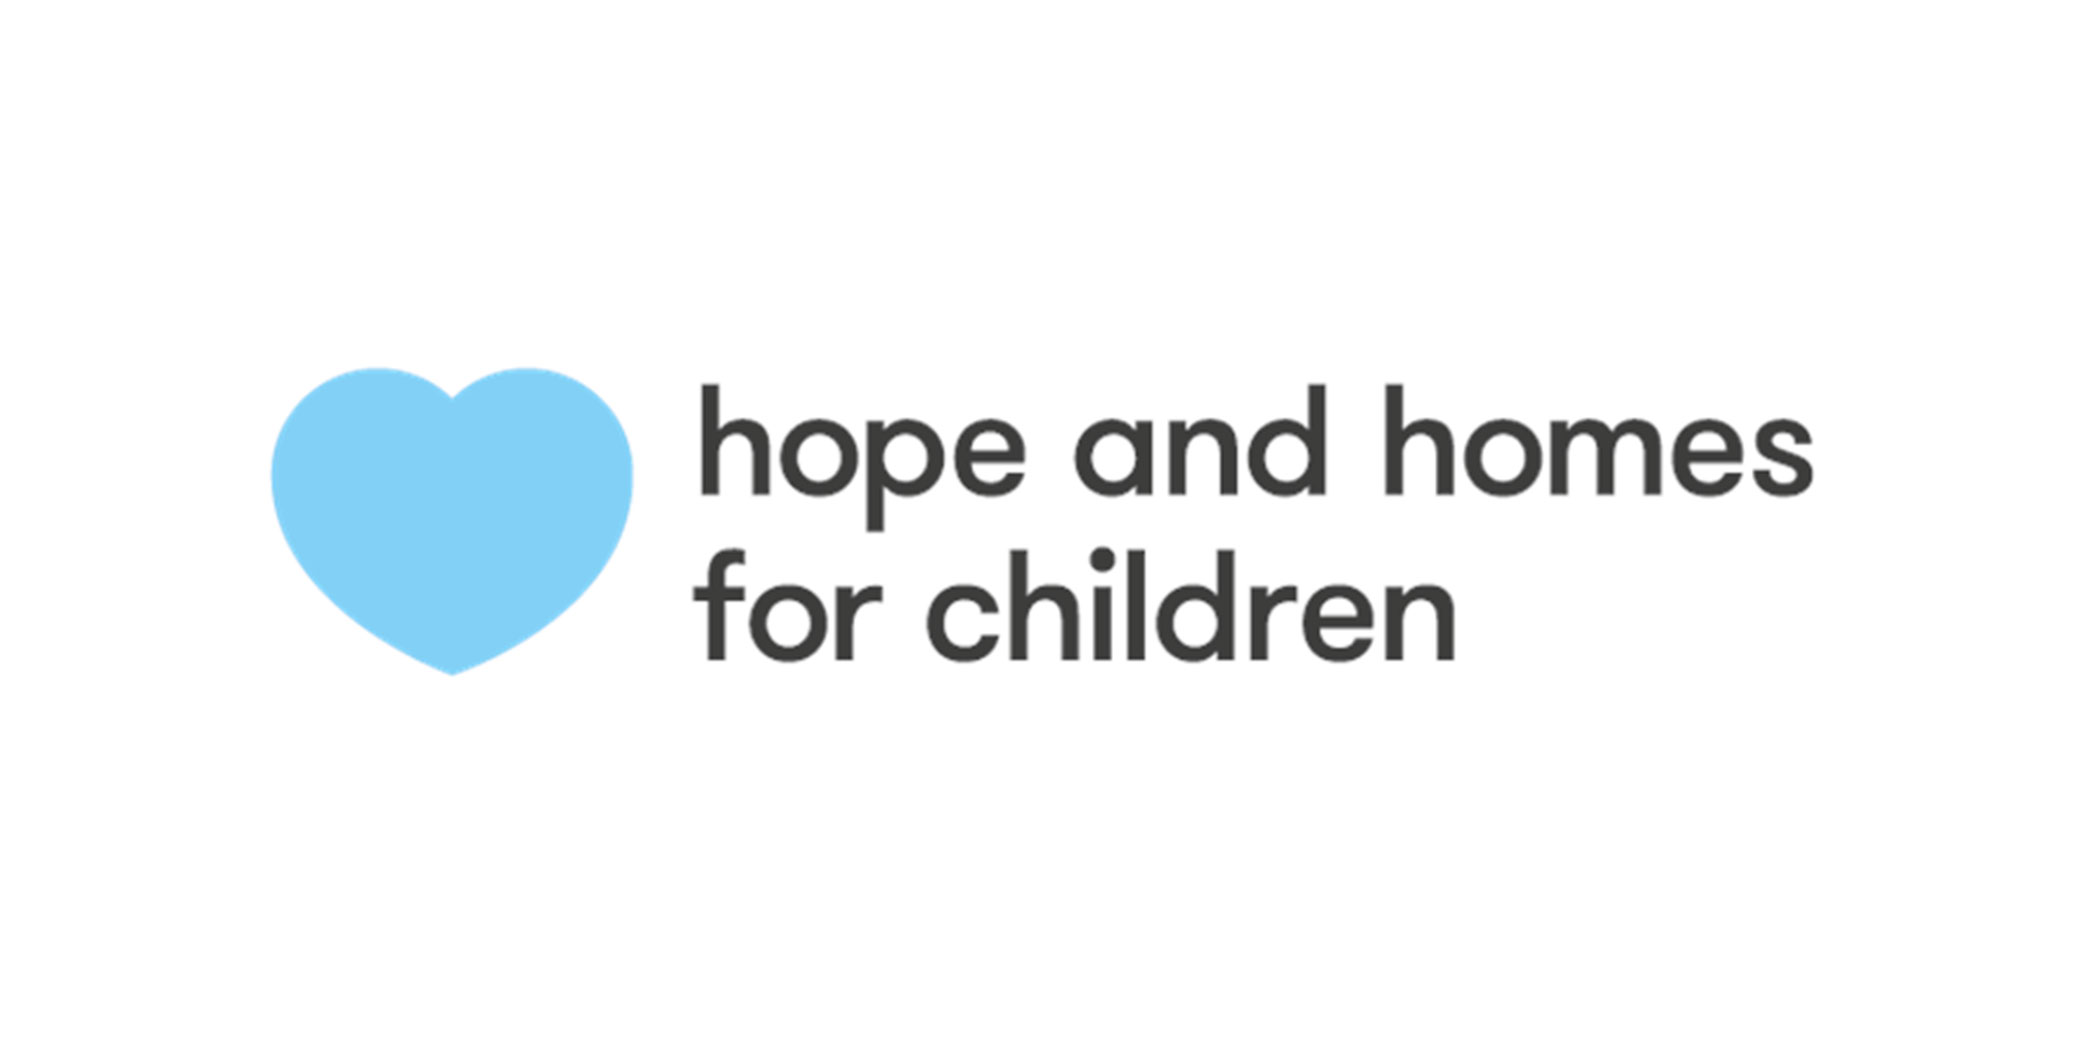 home and hope for children